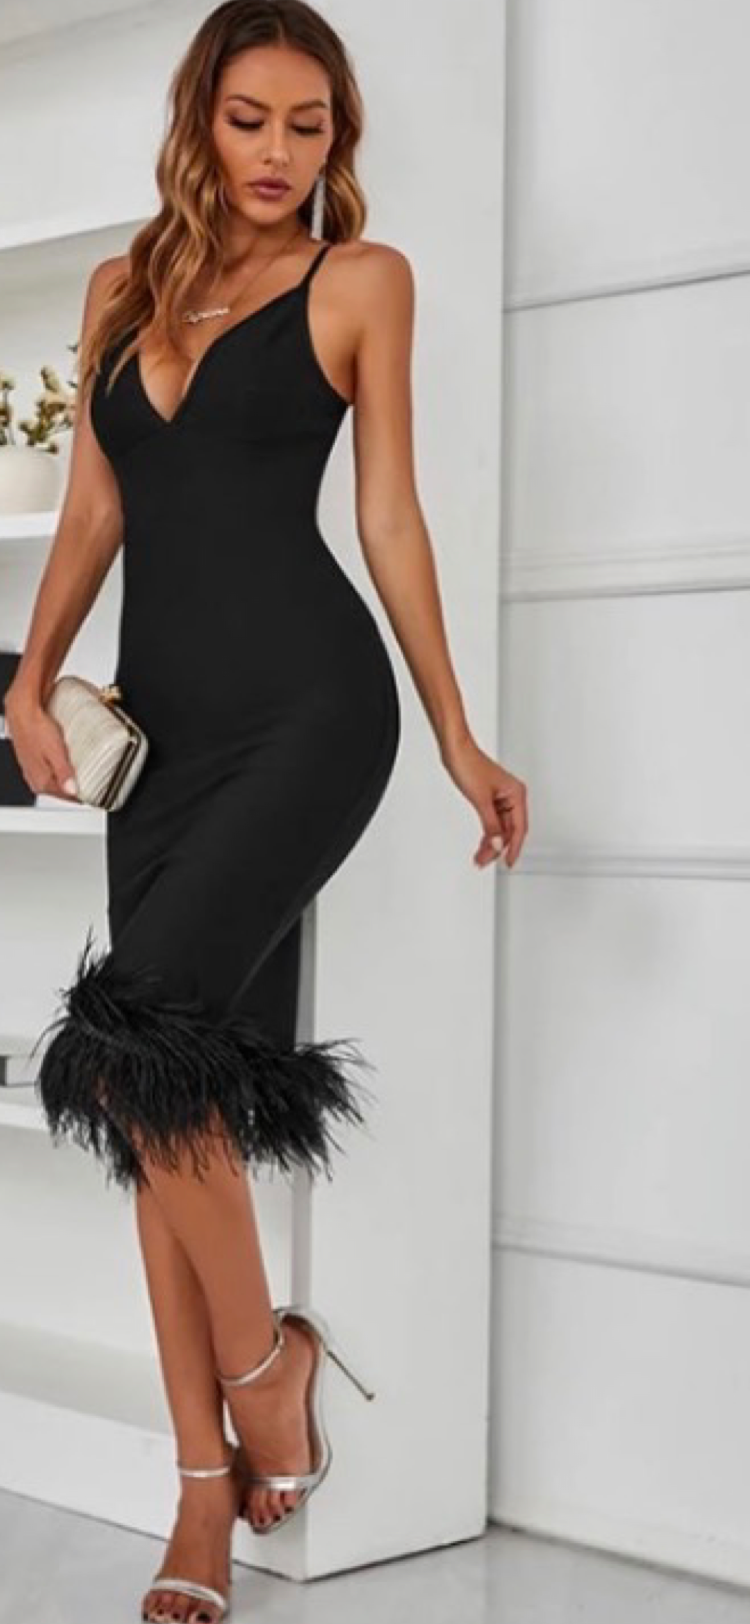 Glamorous Feathers Dress Be the Center of Attention